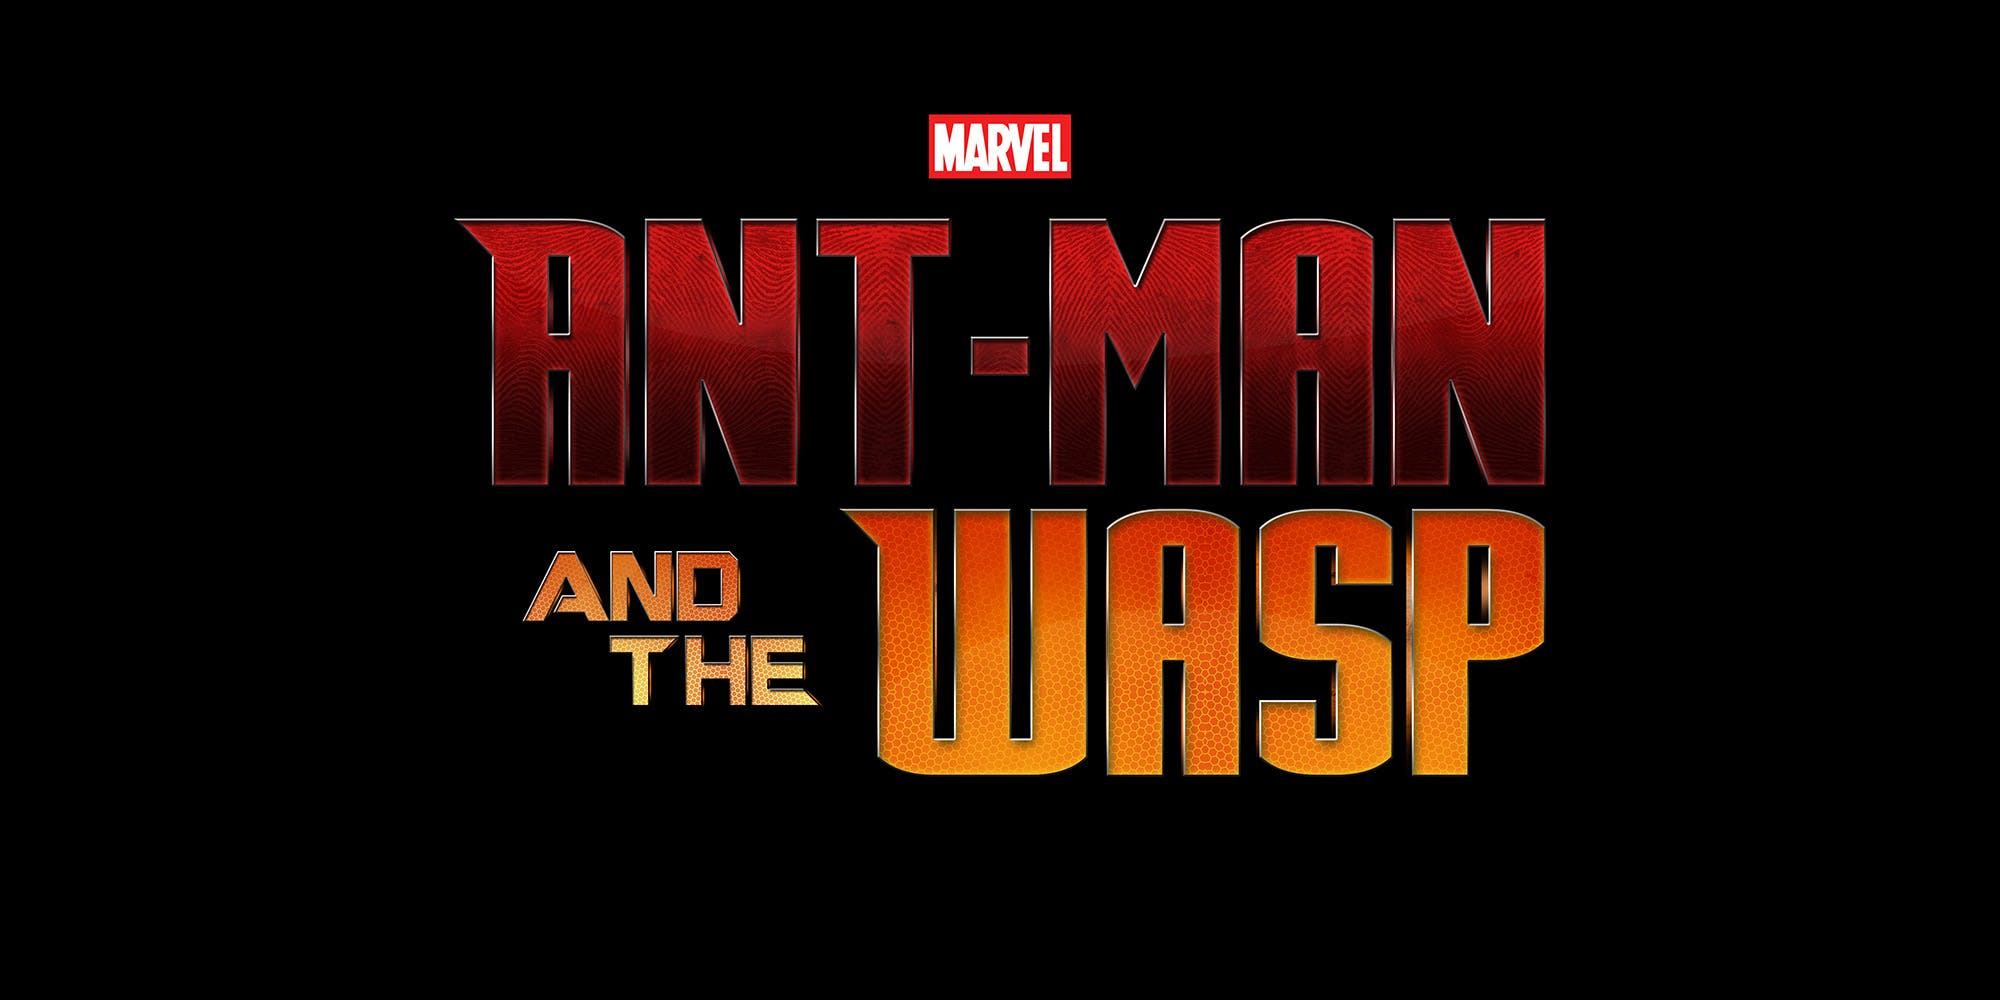 Production On ‘Ant-Man and The Wasp’ Officially Wraps